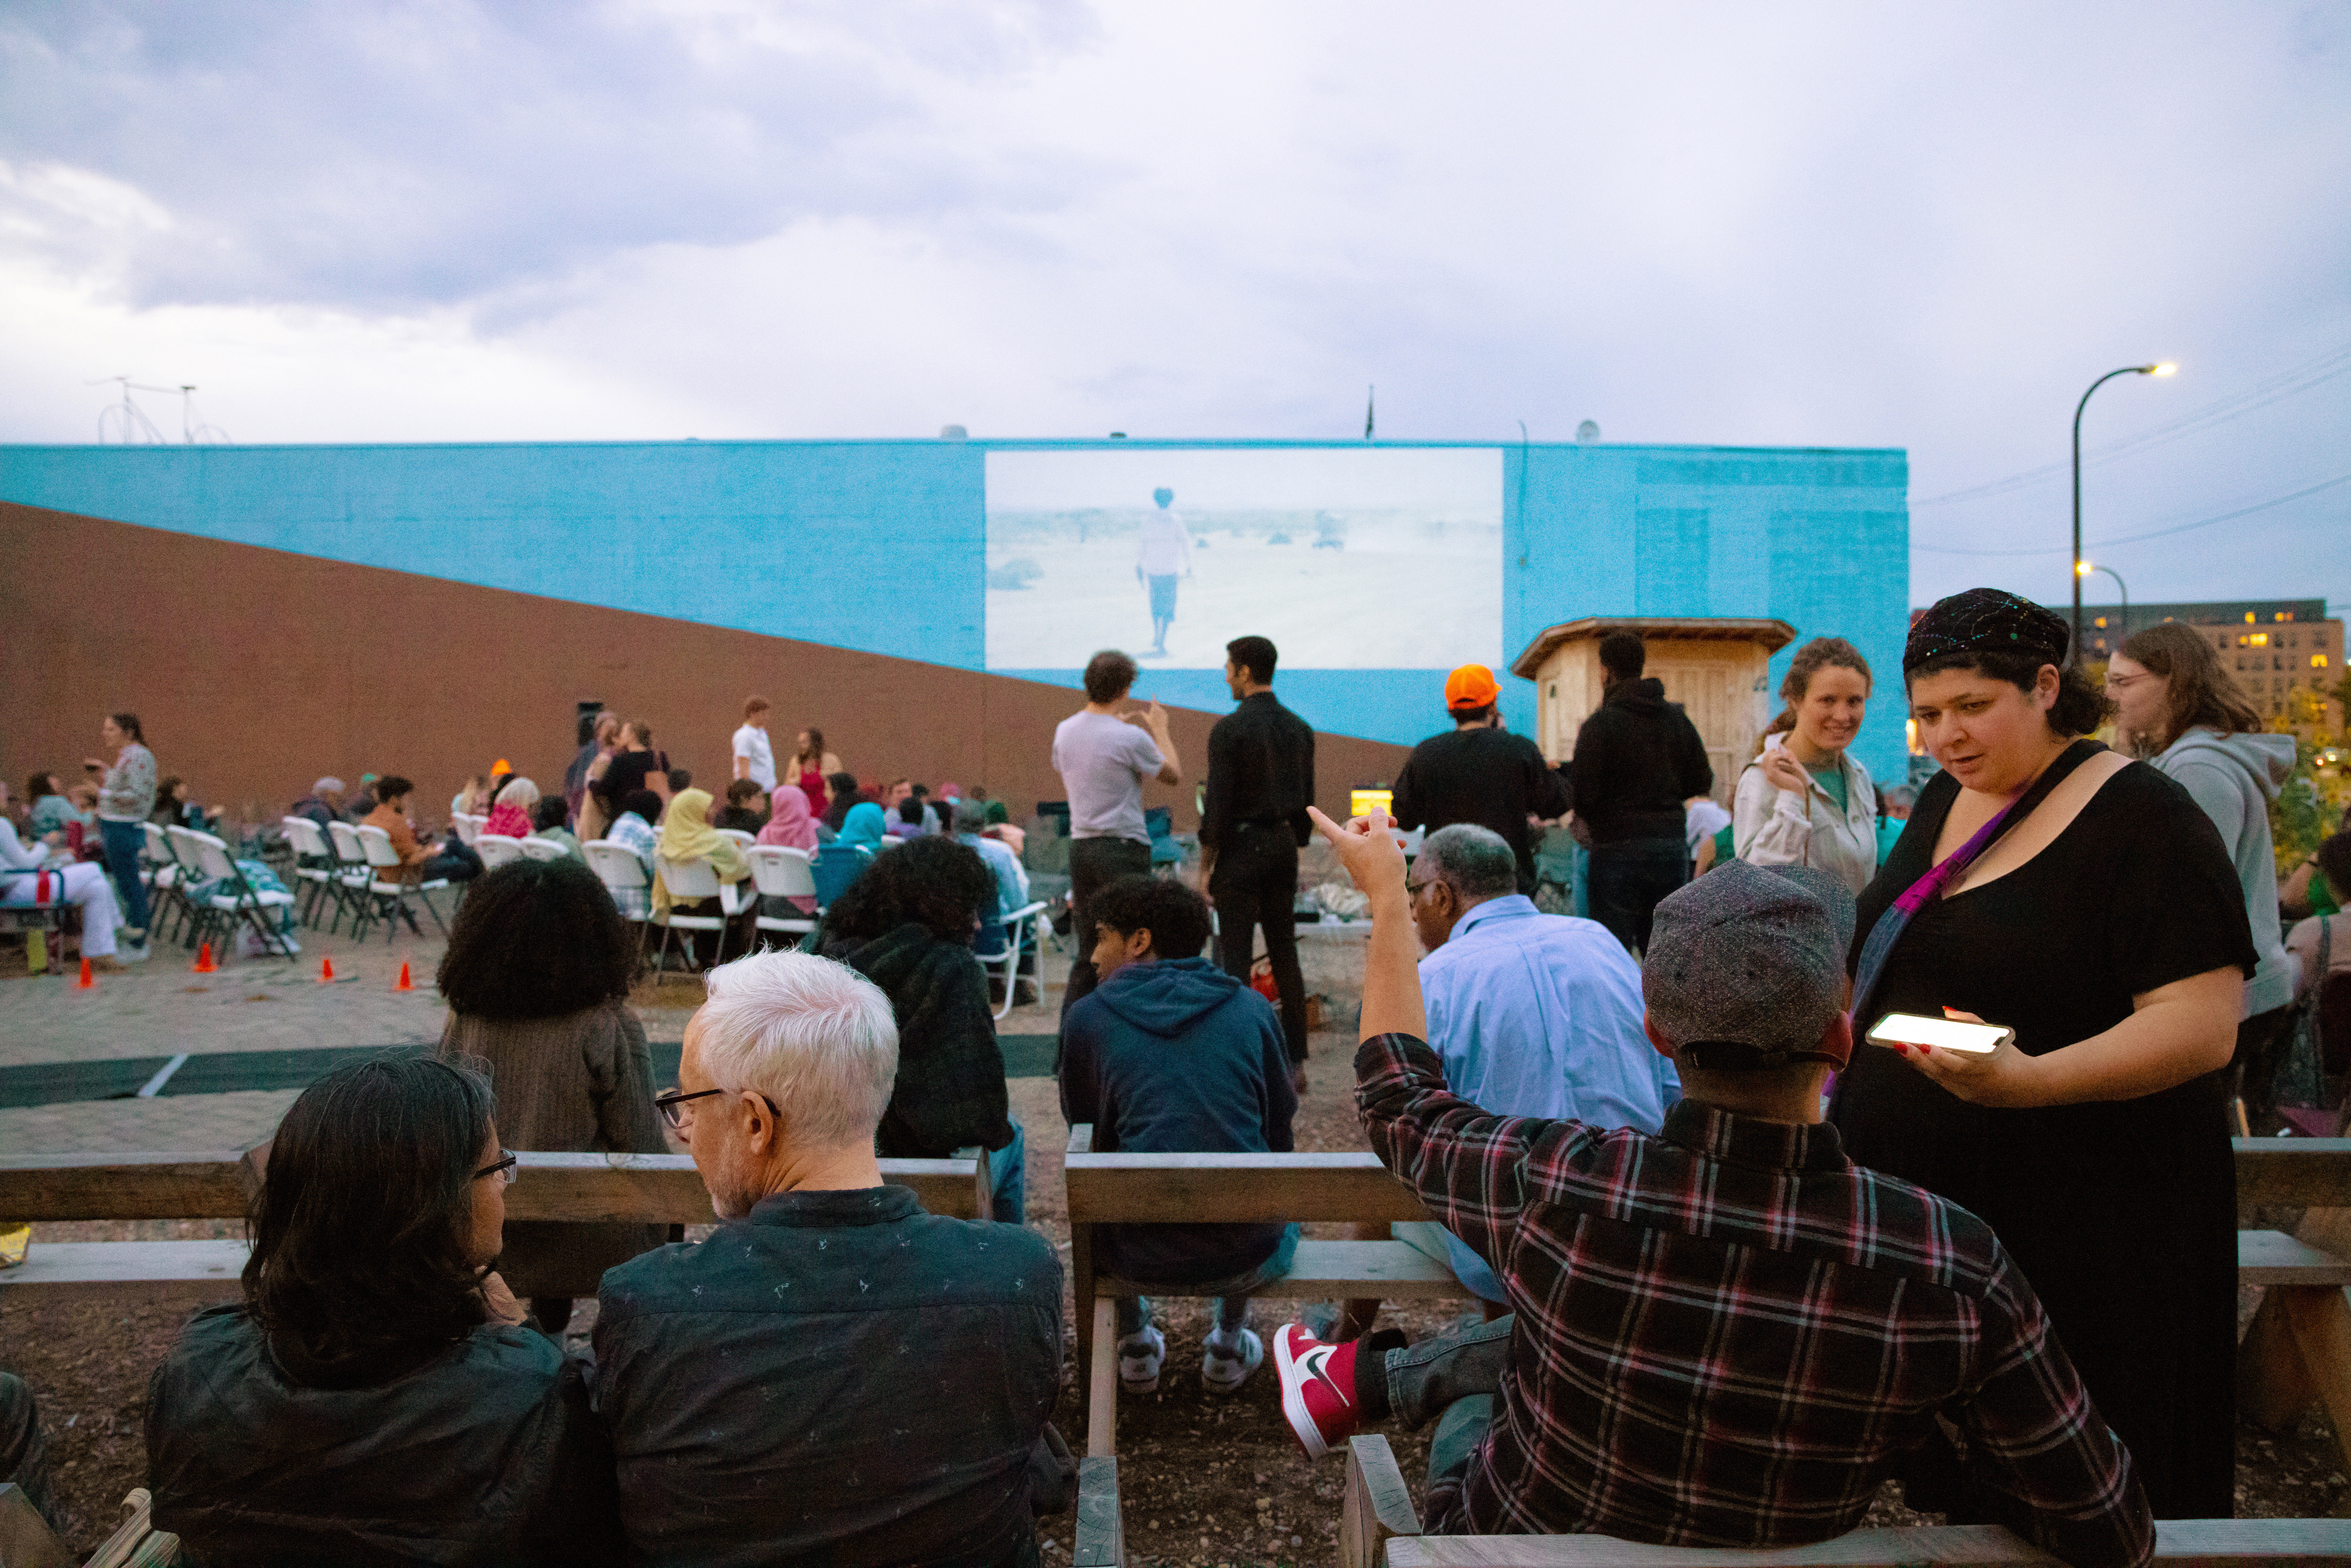 People sit around on wooden benches and in lawn chairs facing a tall side of a building that has a projected image during the 16th Arab Film Fest organized by Mizna in 2022 in Minneapolis, Minnesota.